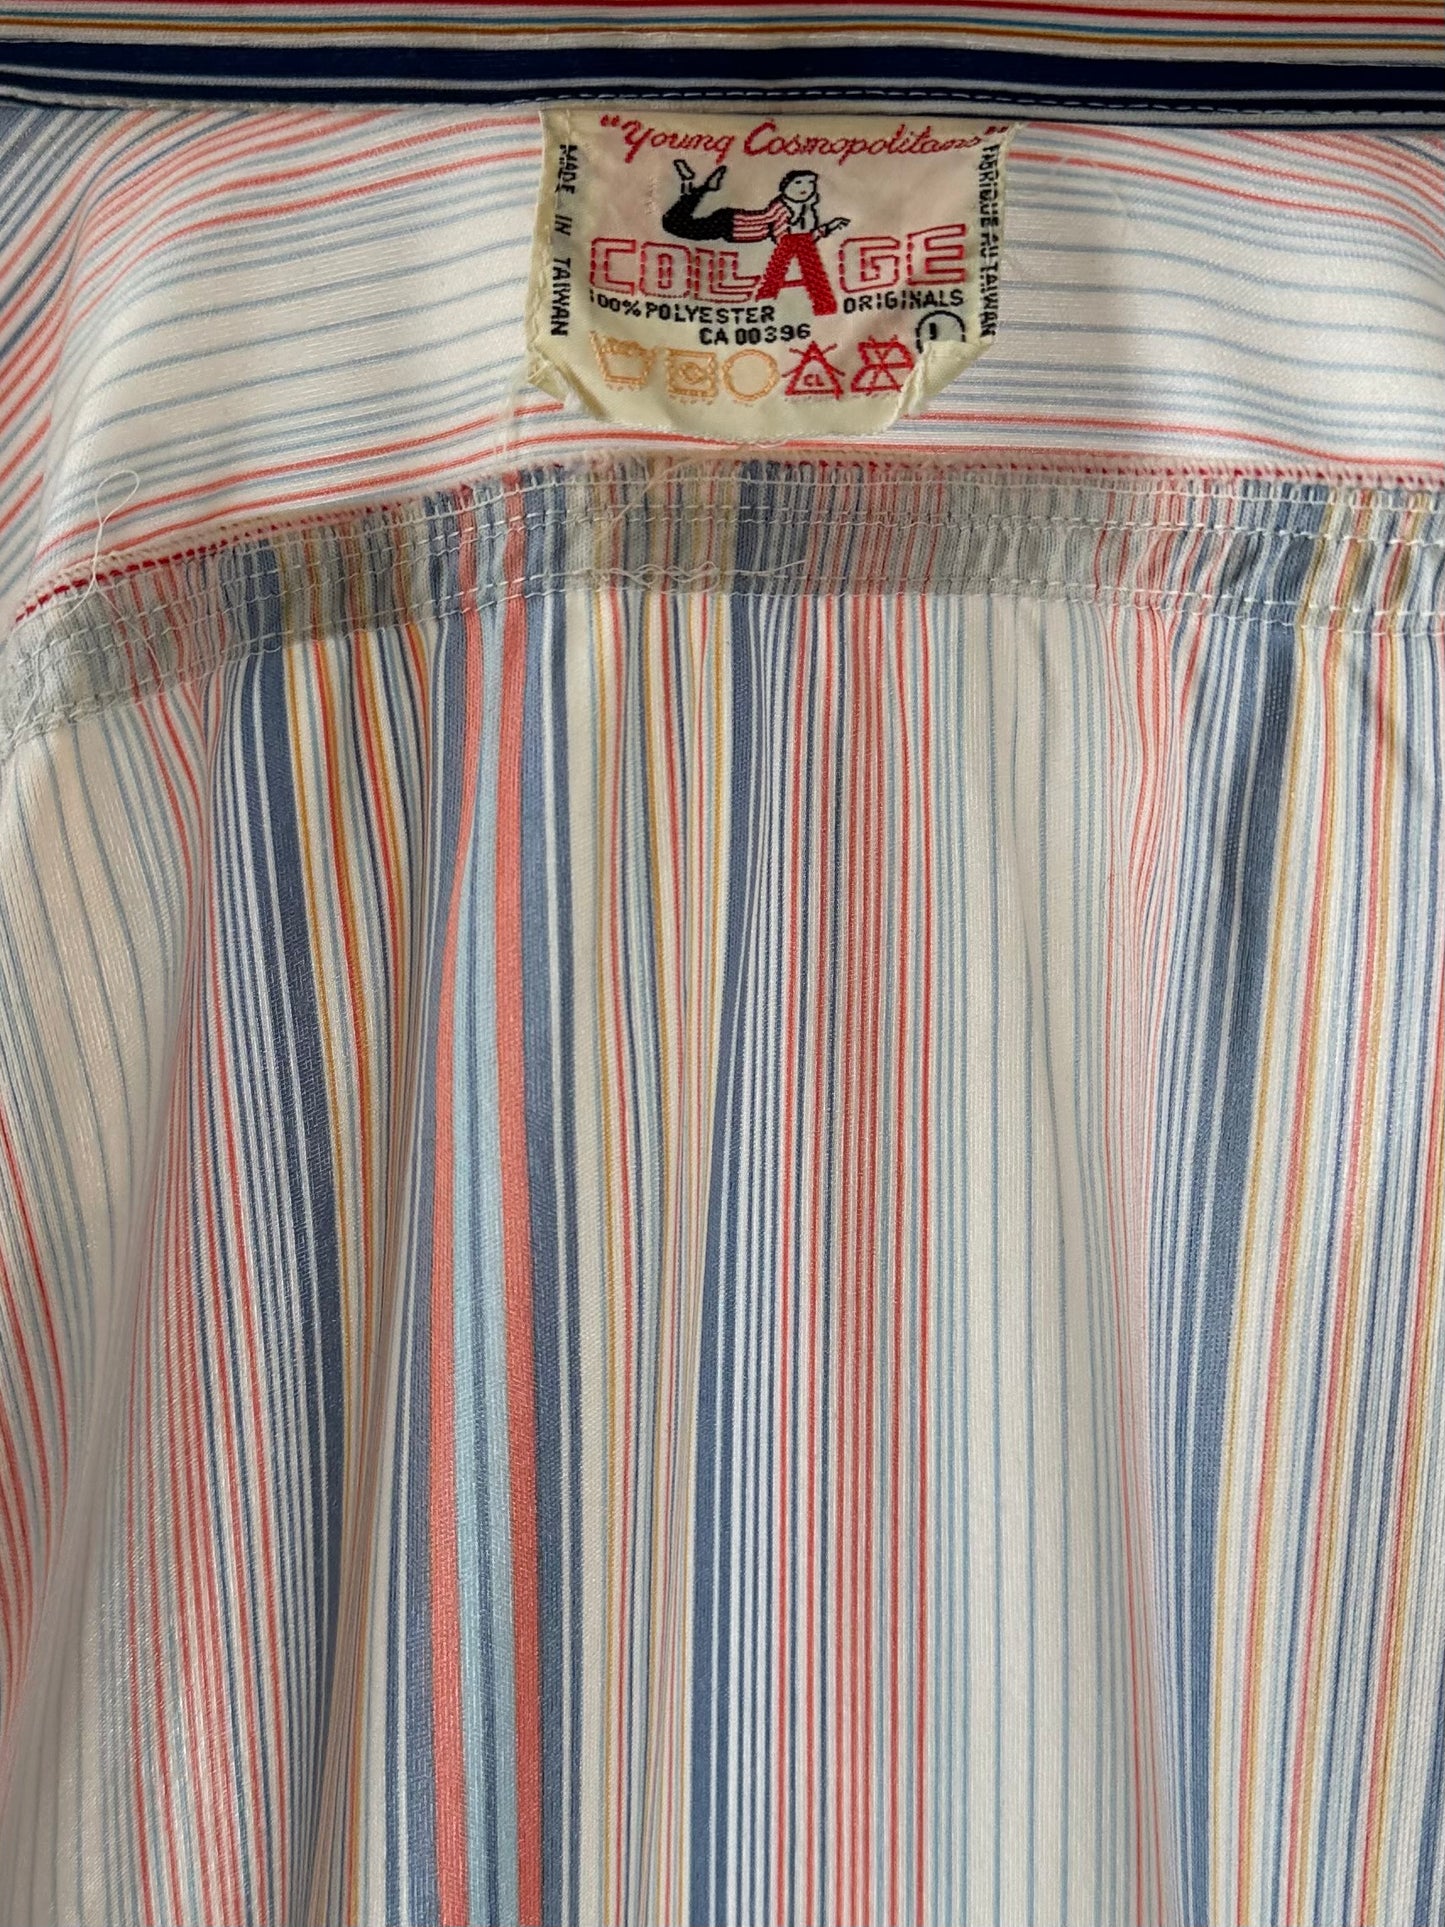 70s 'Collage' Striped Blouse / Small